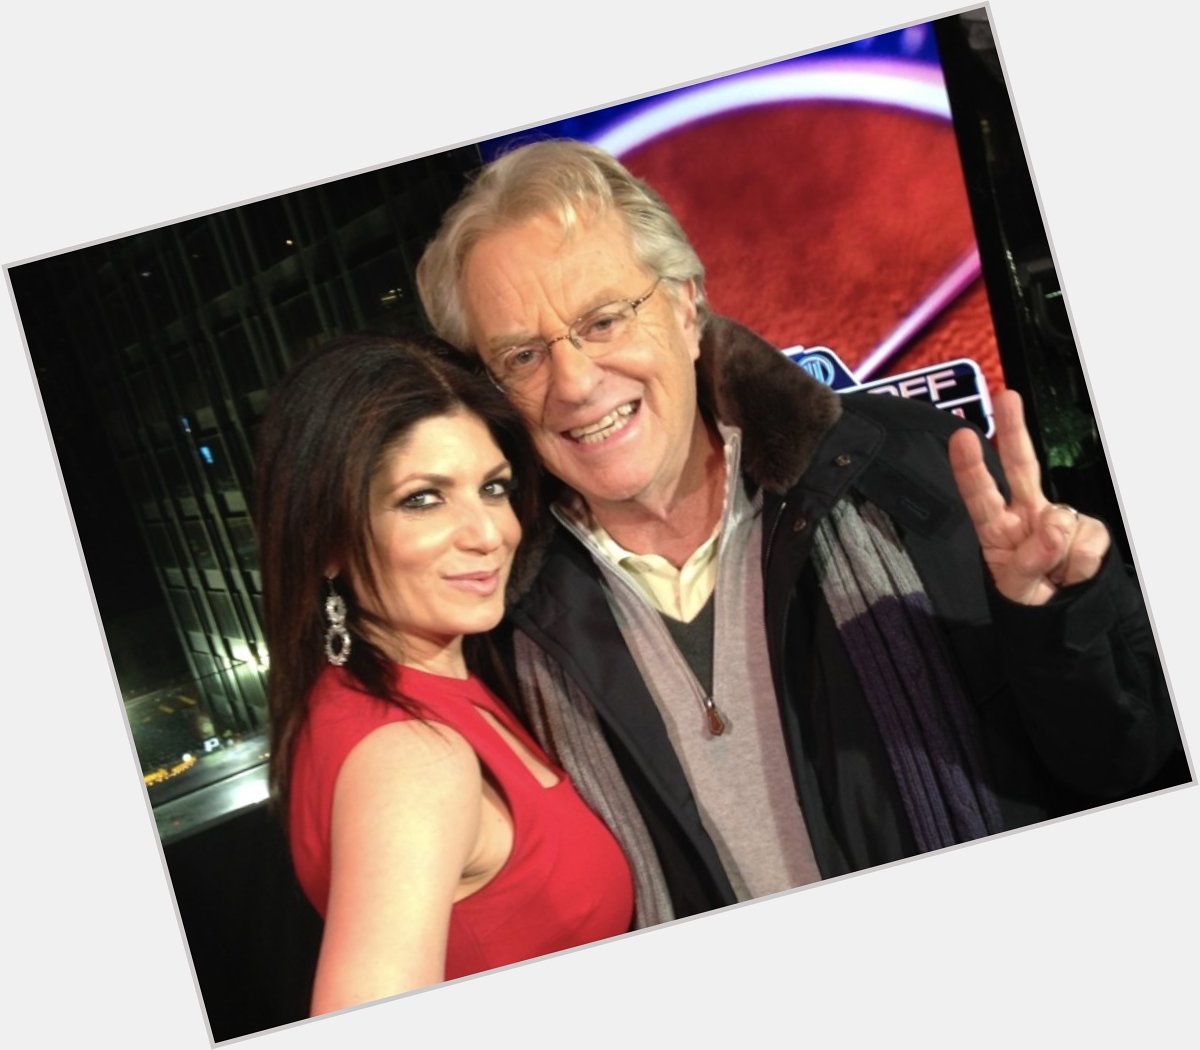 Happy birthday to one of my faves, Jerry Springer!   